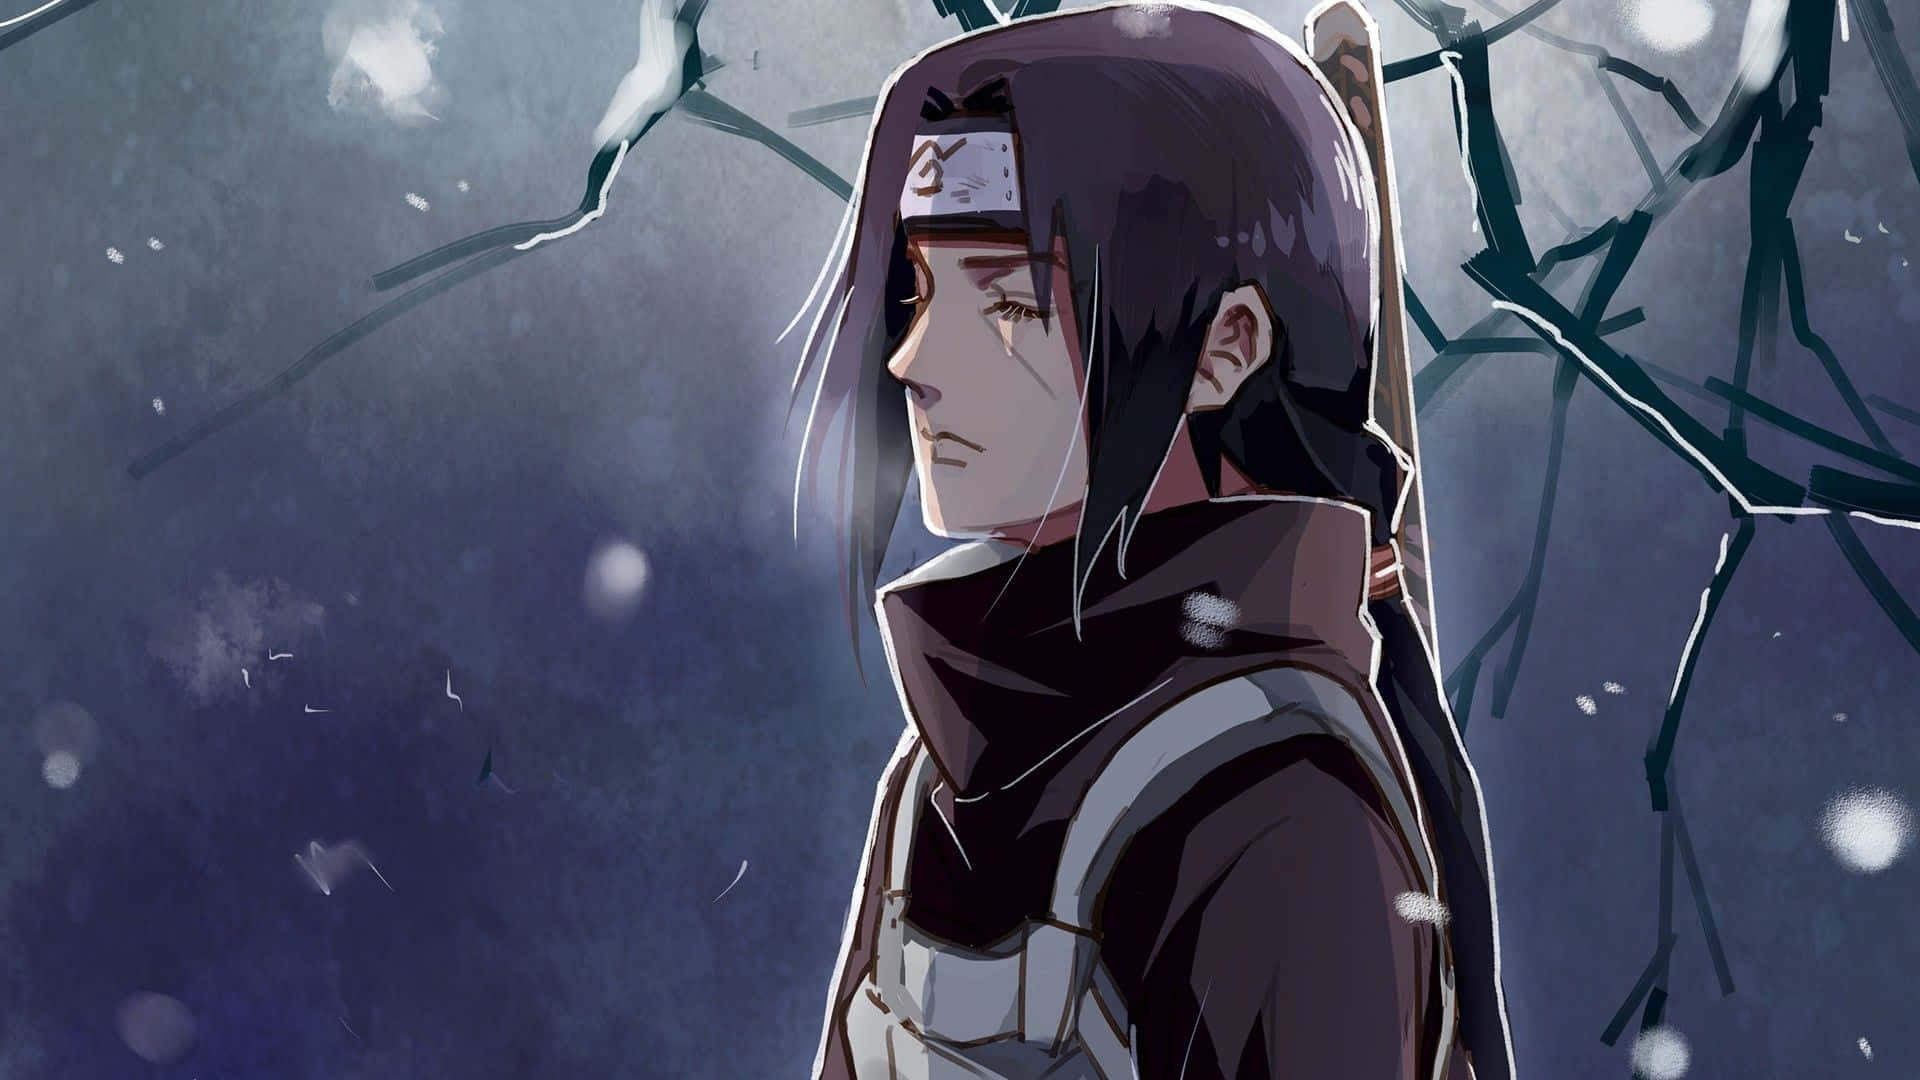 Itachi Aesthetic With Eyes Closed And Winter Snow Falling Wallpaper